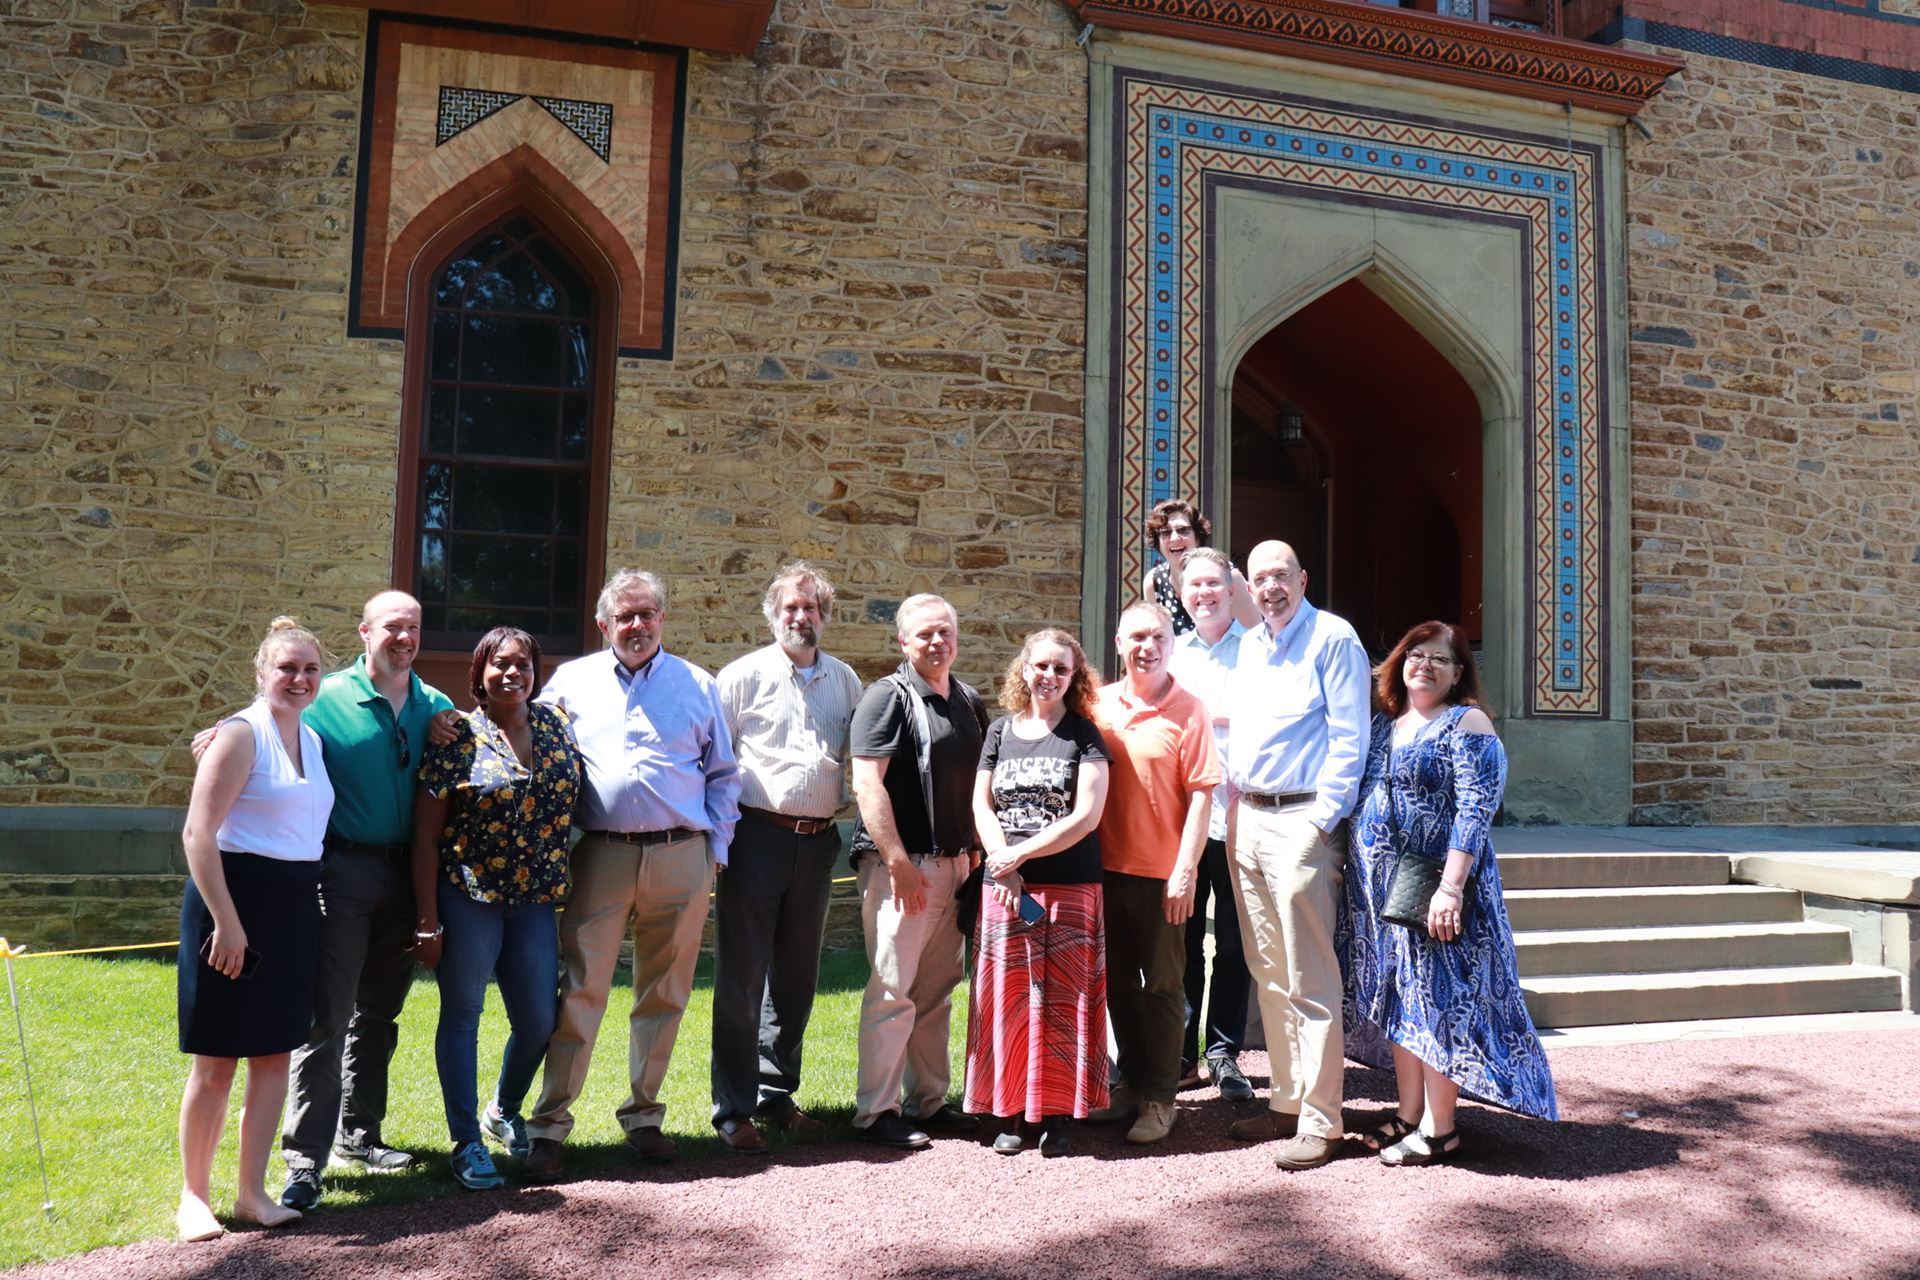 Today MANY board and staff traveled to Olana State Historic Site for our June meeting. What an incredible place to meet as we work to better serve #nysmuseums and strengthen our organization. 